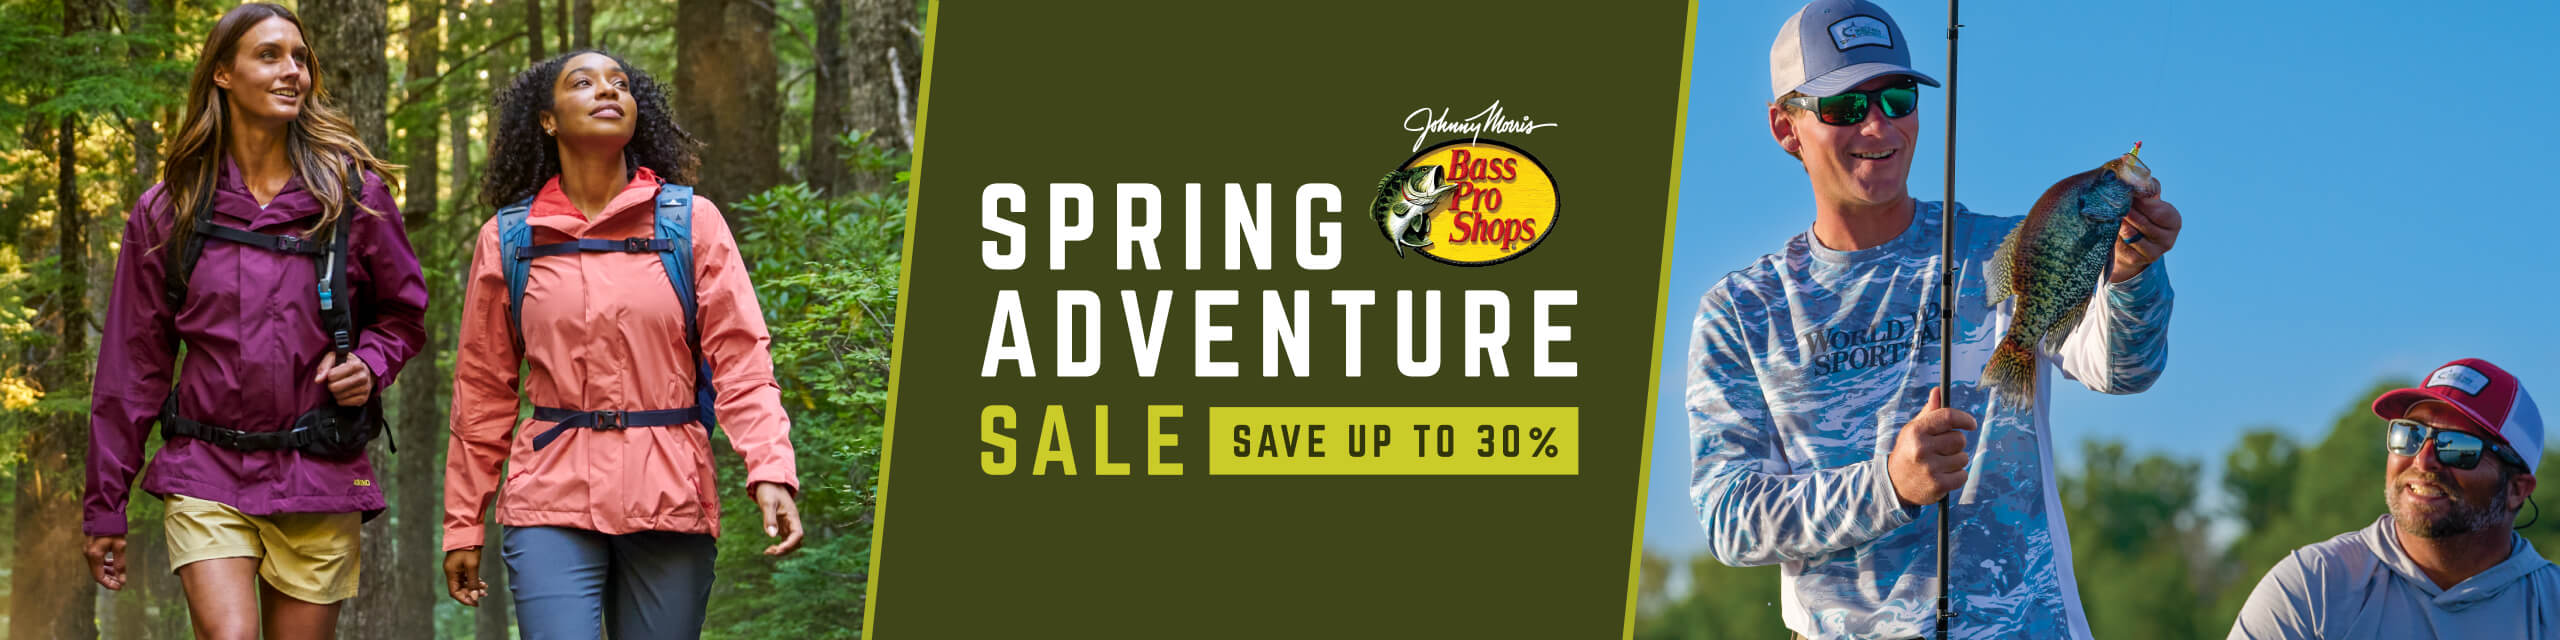 Spring Adventure Sale at Bass Pro Shops